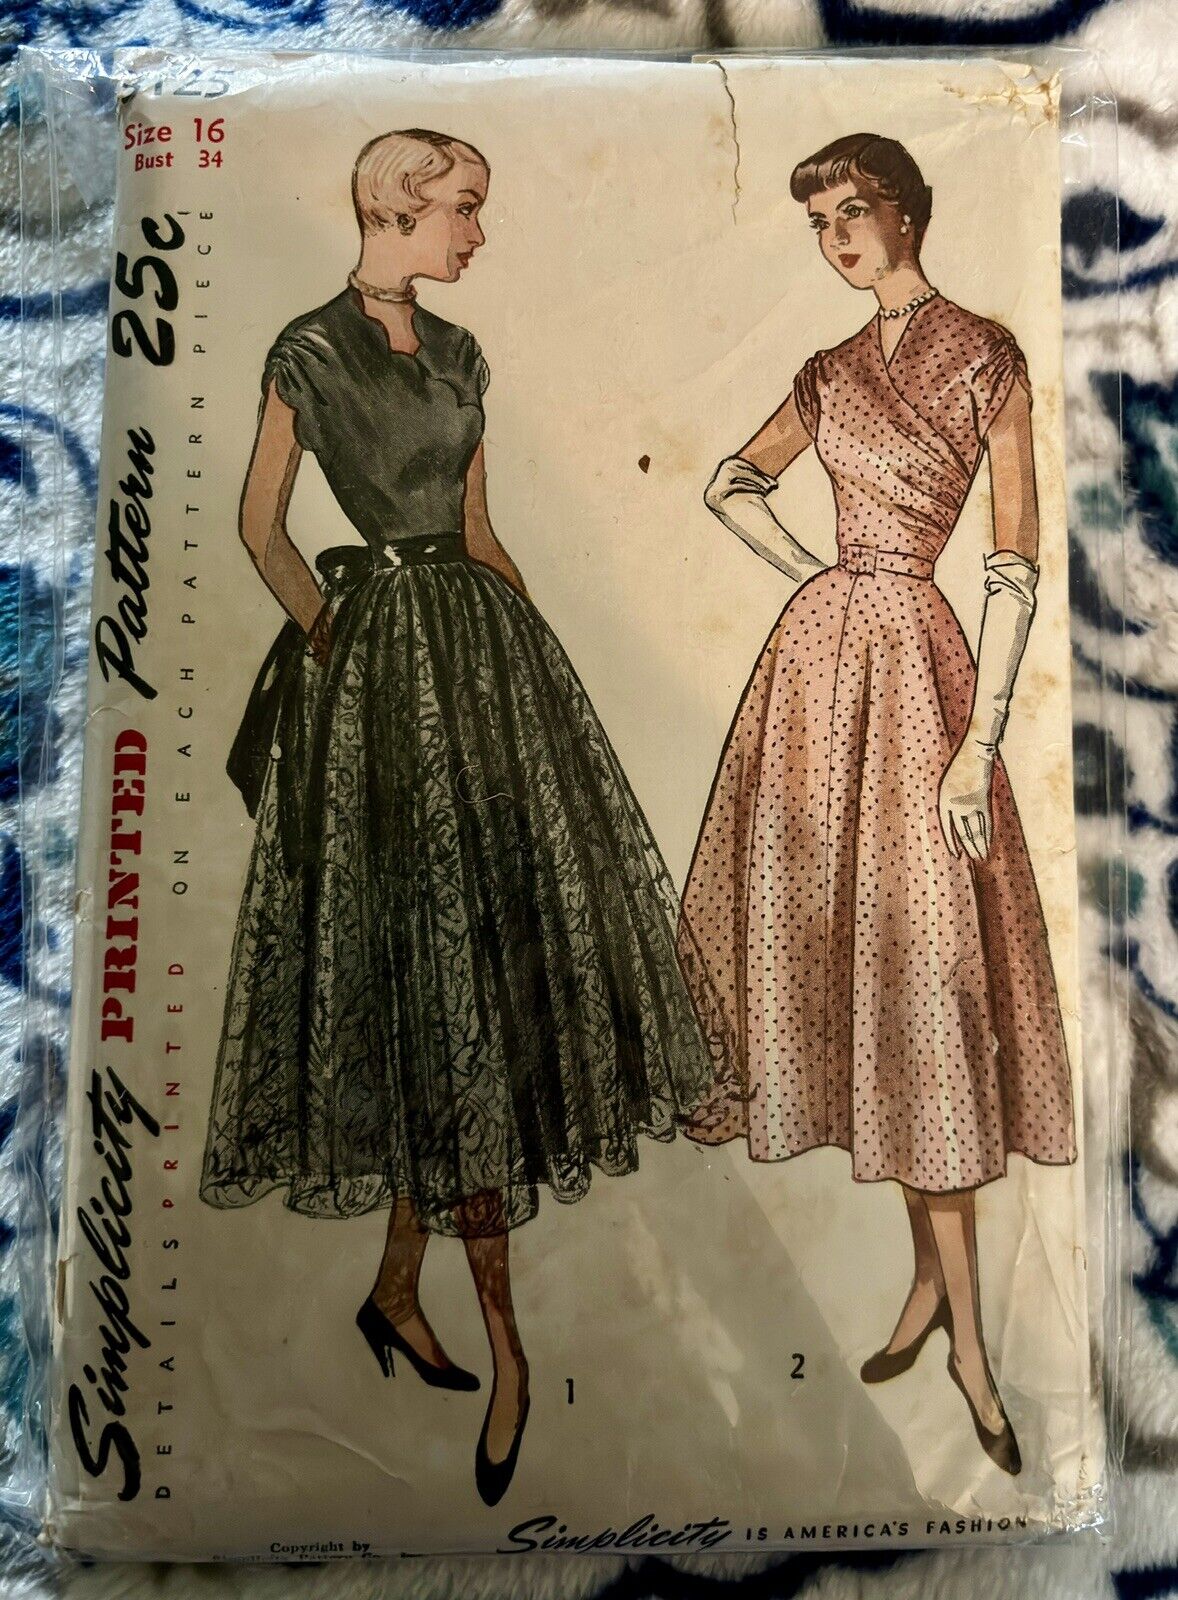 Simplicity 3125 - Vintage 1940s-50s sewing pattern